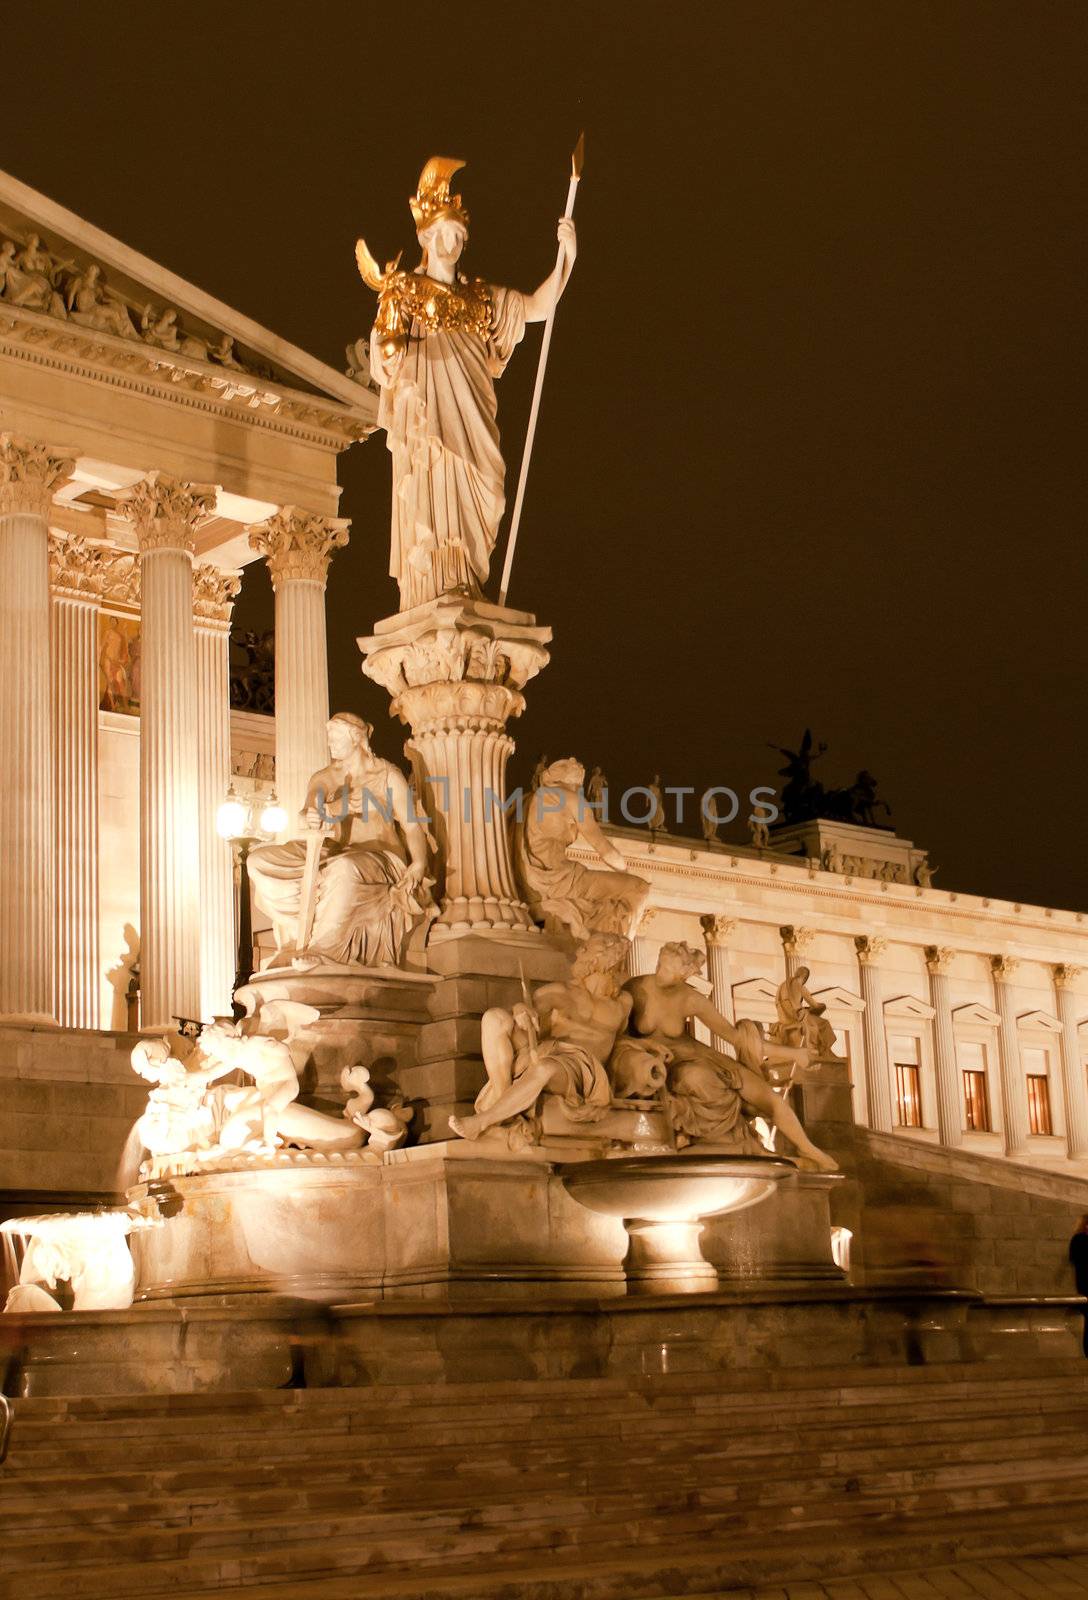 Statue in Vienna at night time